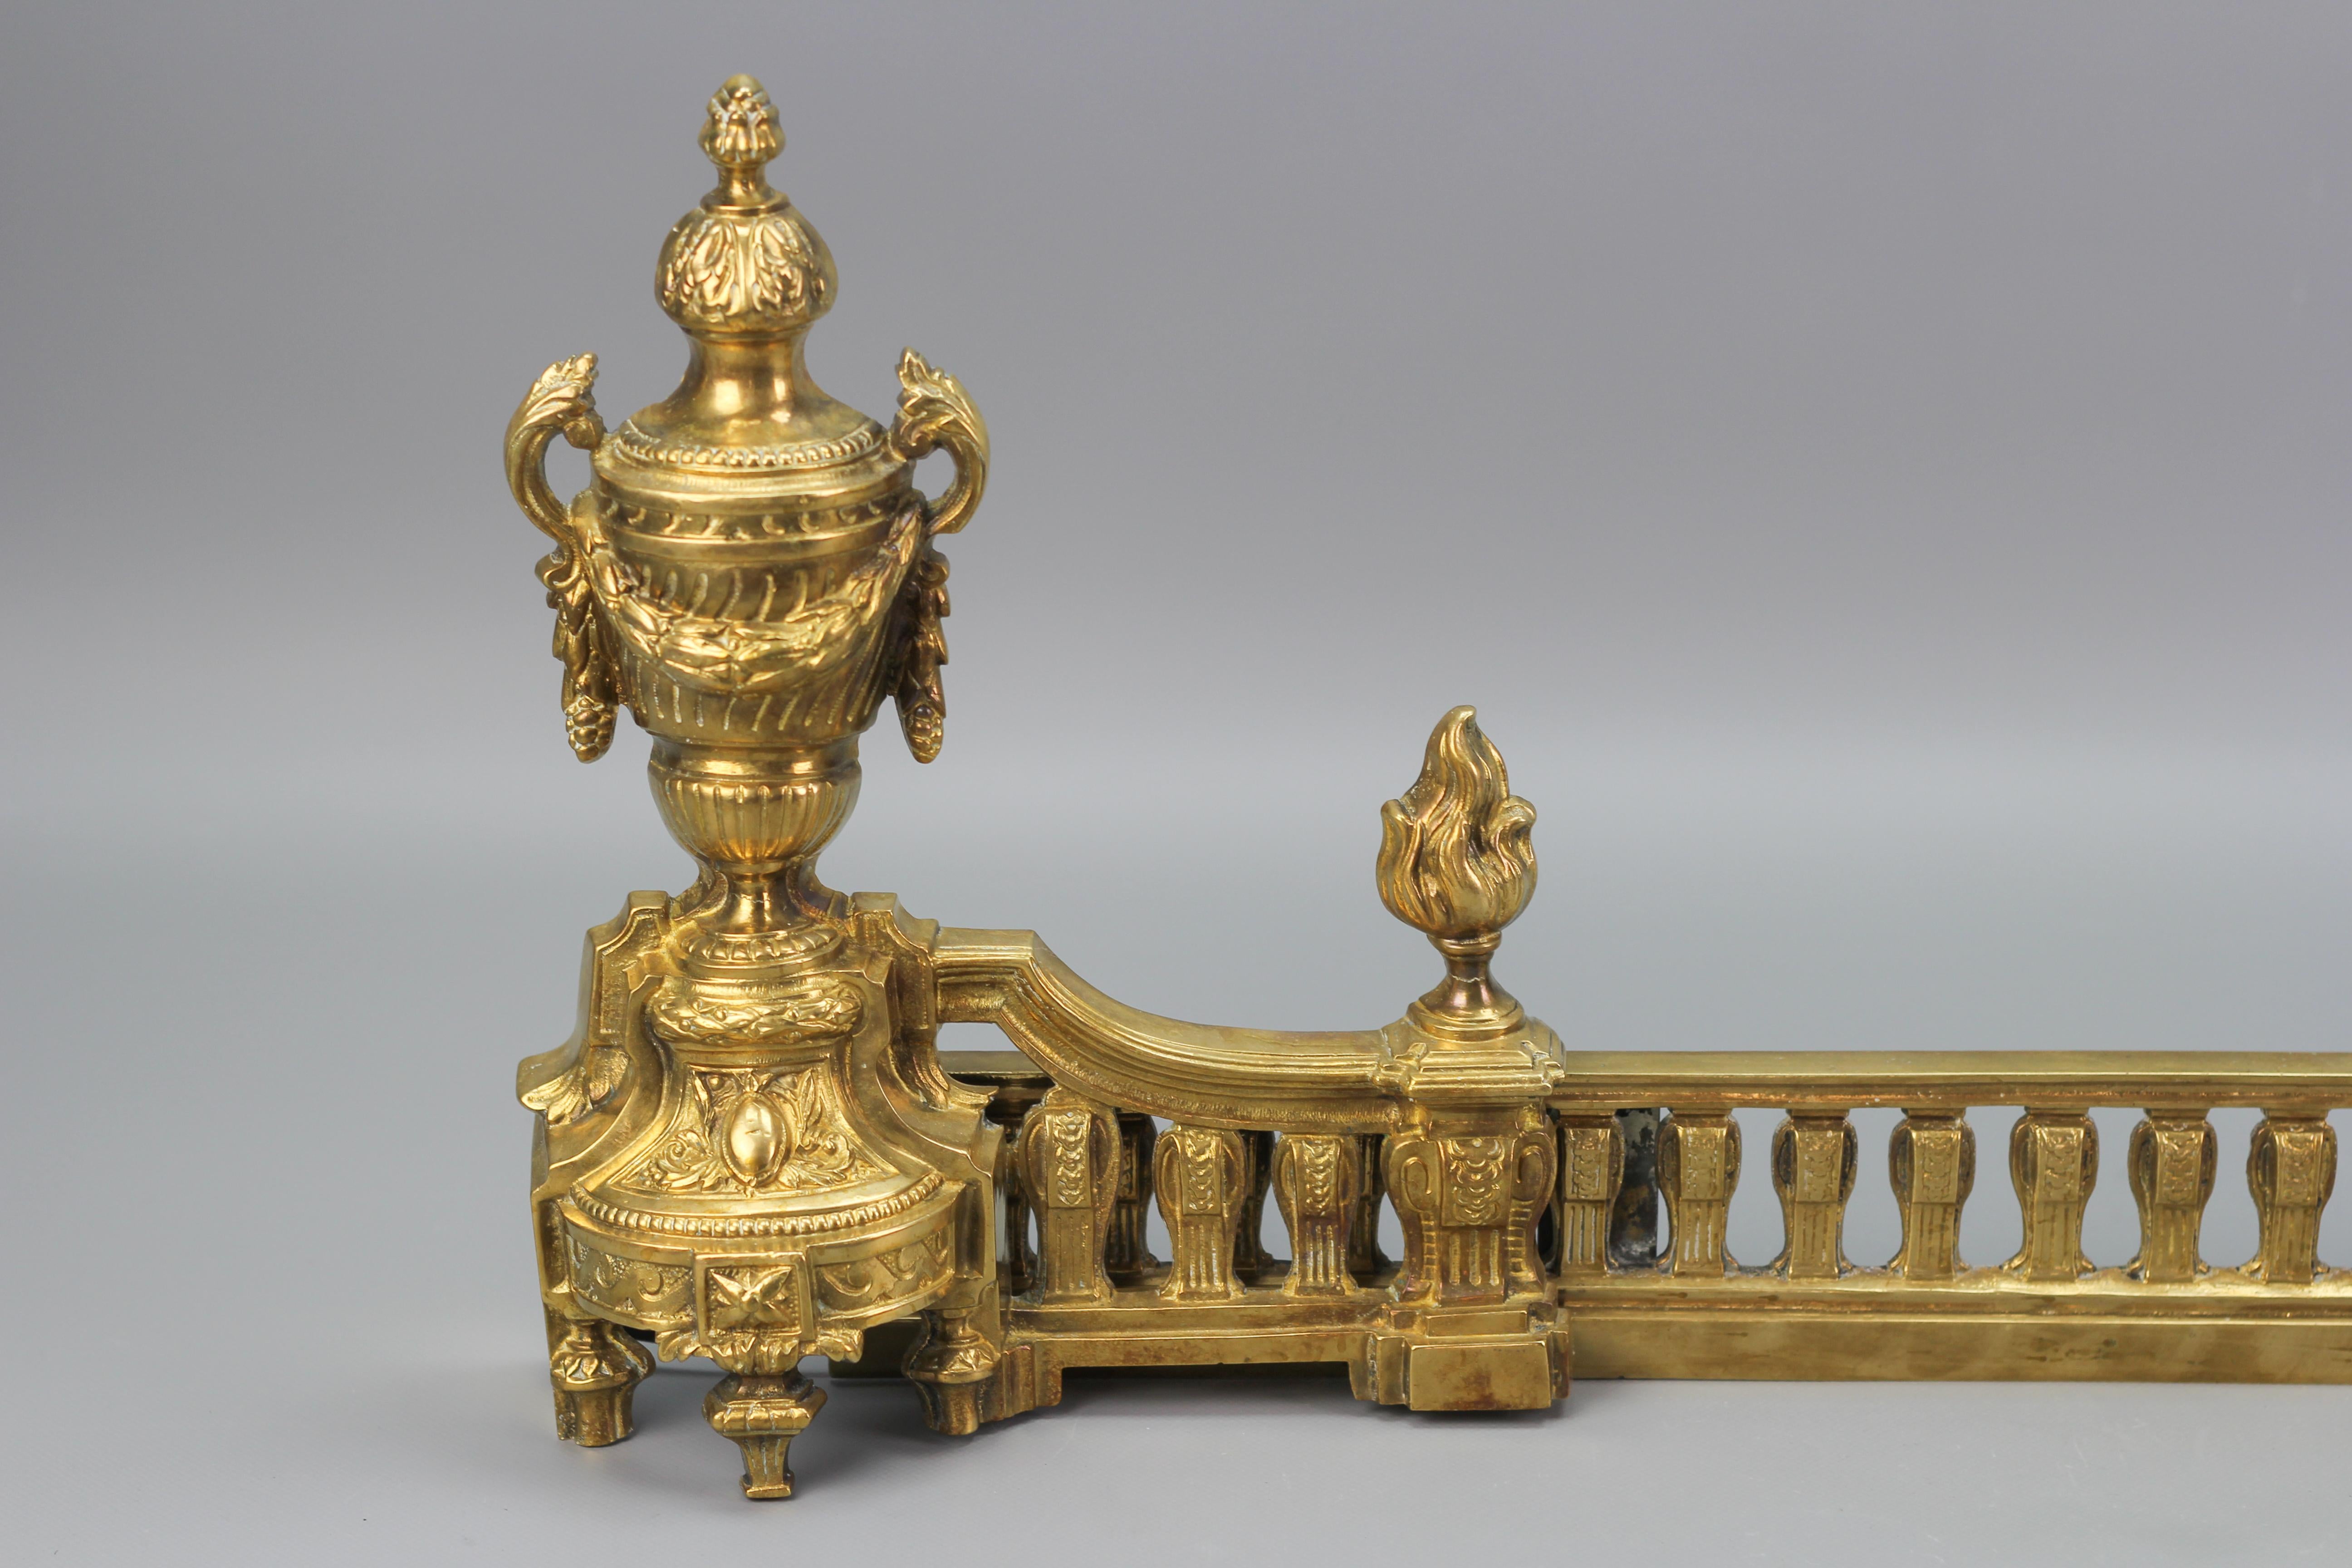 French Neoclassical style bronze fireplace fender set, late 19th century, sold as a set of 3.
This impressive French Neoclassical style bronze fender set dates to the late 1800s. Richly ornate with acanthus foliate accents, urns, and flame